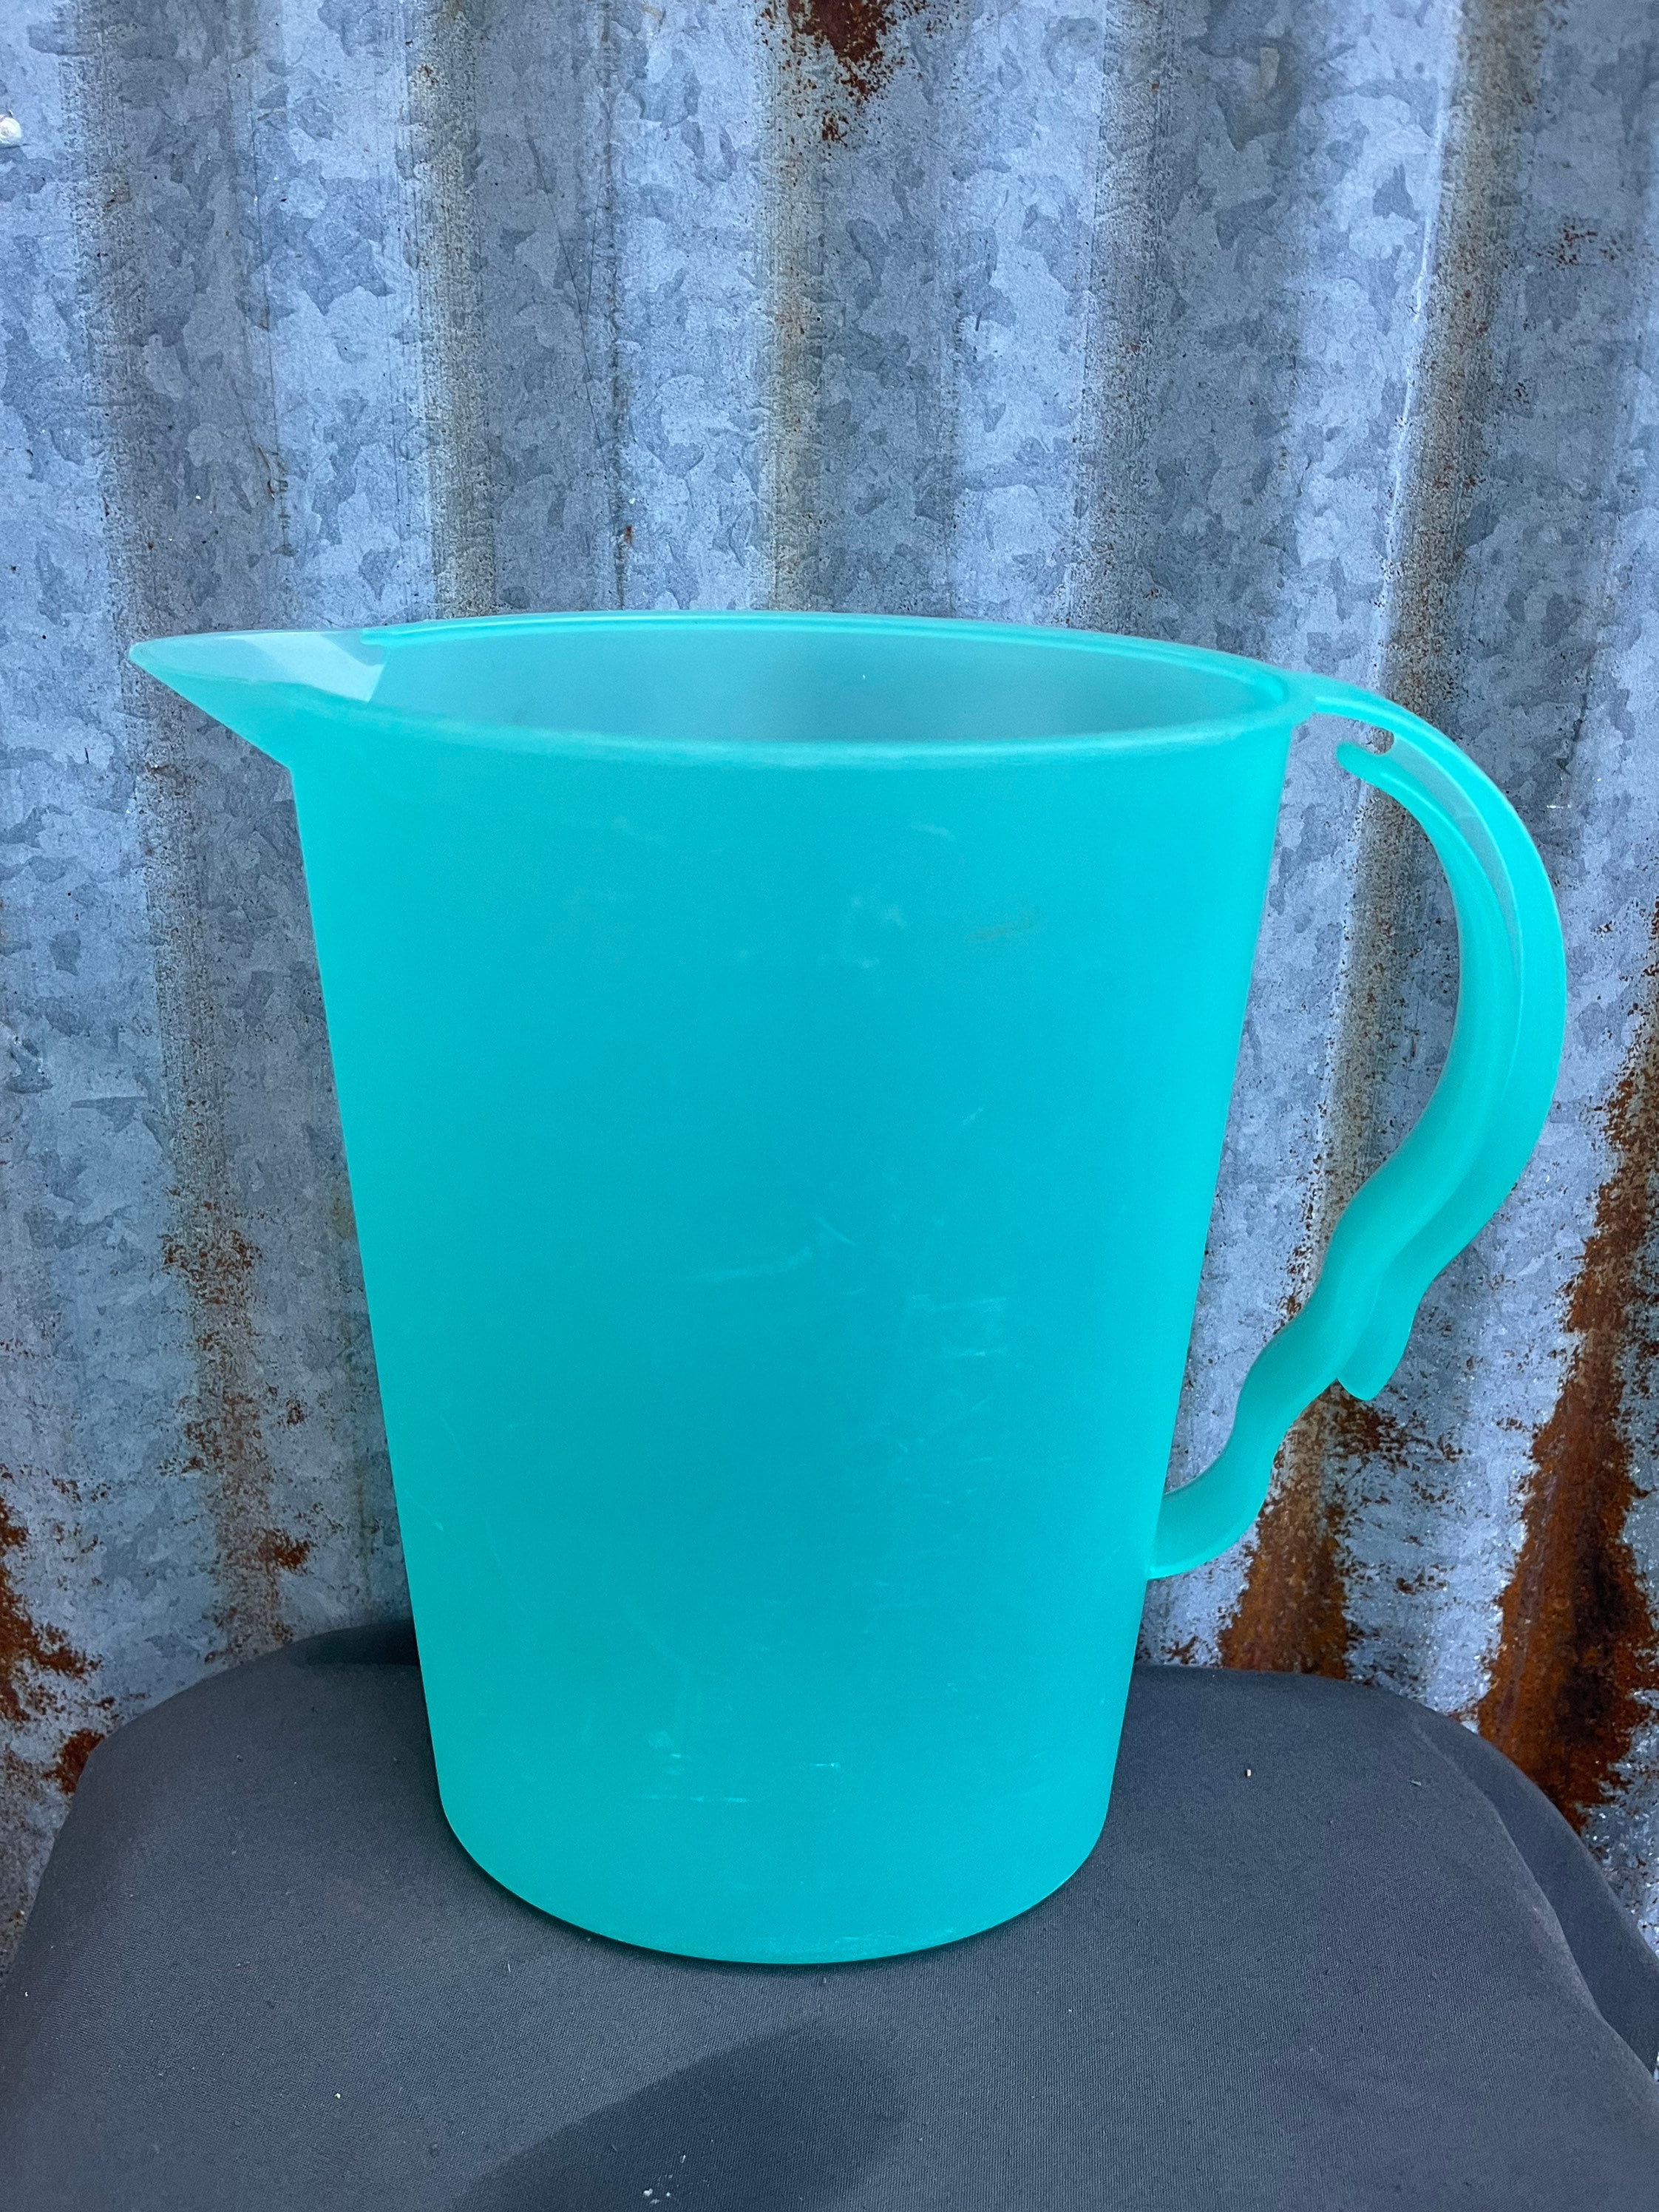 SMIRLY Glass Pitcher with Lid and Spout: Glass Water Pitcher with Lid, Iced  Tea Pitcher for Fridge, Glass Pitcher with Handle and Lid, Glass Juice  Pitcher, Glass Jug, Lemonade Pitcher, Glass Water